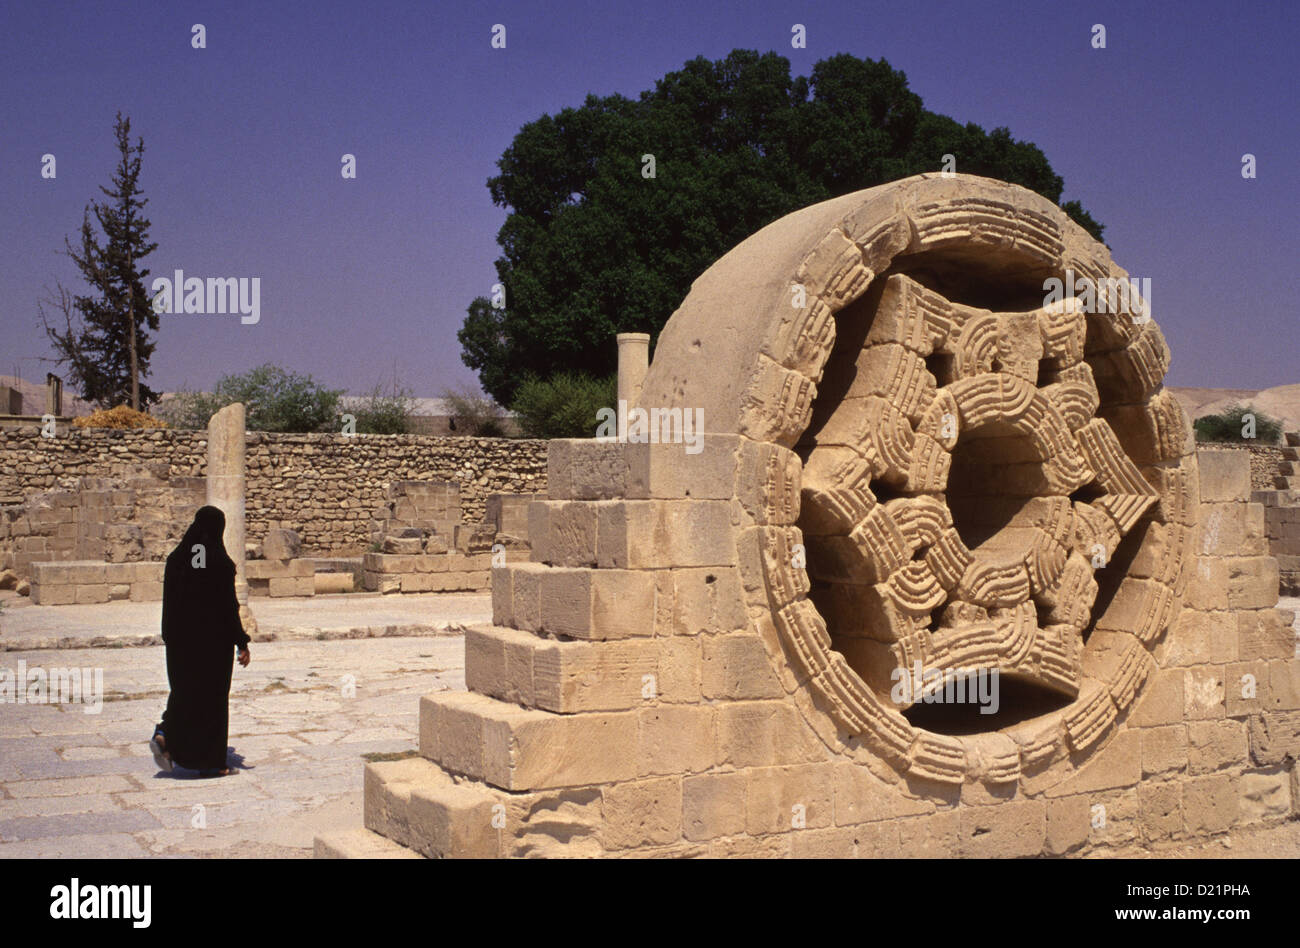 A Palestinian woman walks past a reconstructed relief ornament in Khirbat al-Mafjar popularly known as Hisham's Palace an early Islamic archaeological site near Jericho, in the West Bank Israel Stock Photo